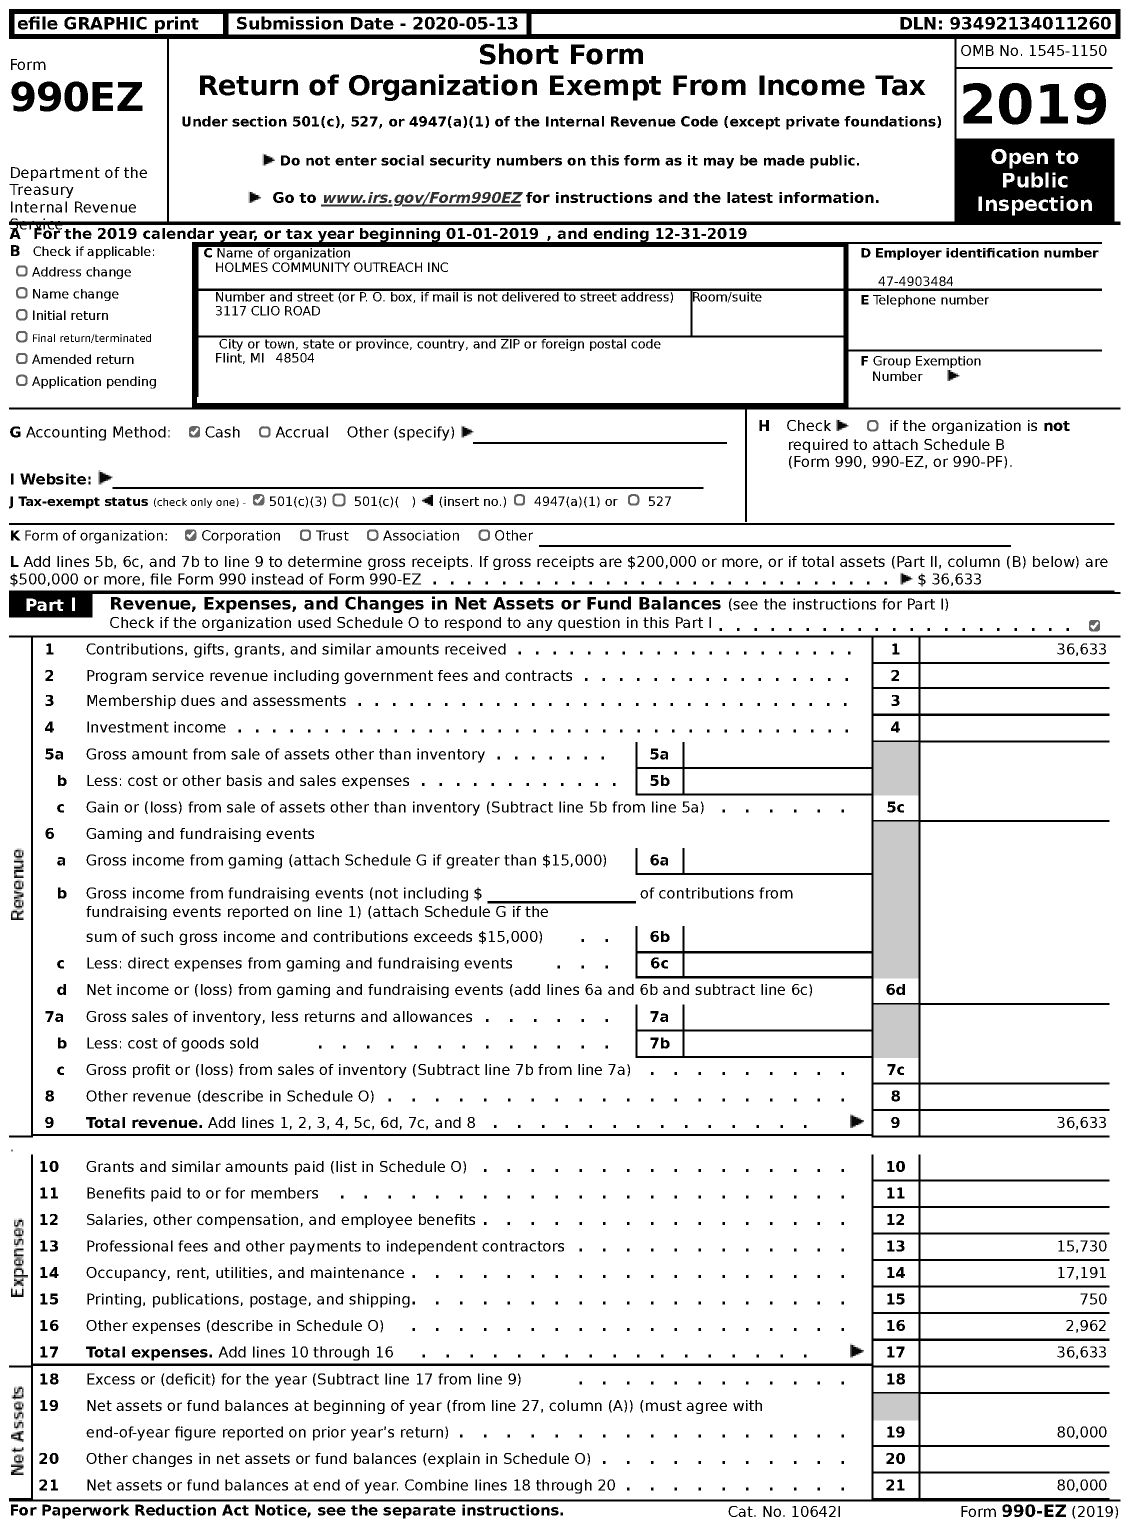 Image of first page of 2019 Form 990EZ for Holmes Community Outreach